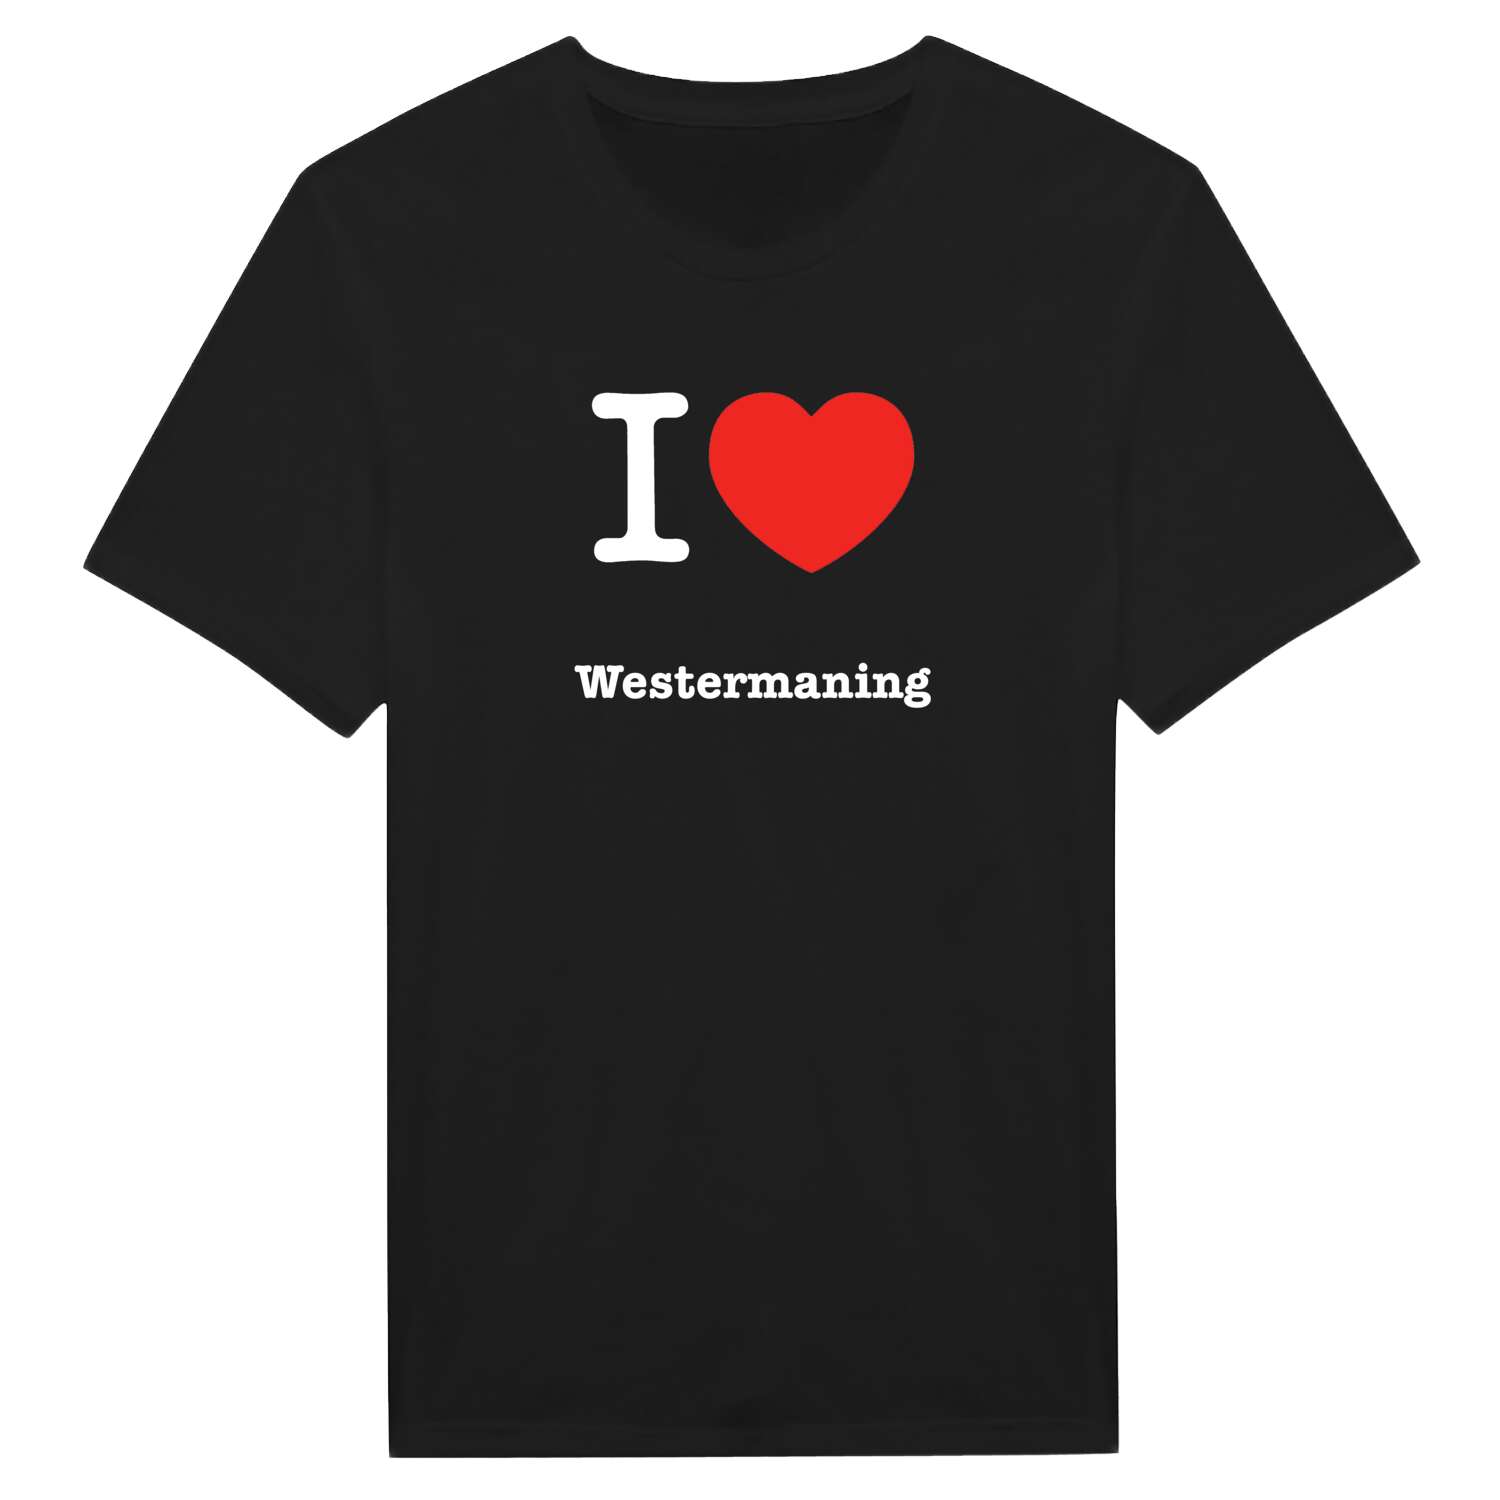 Westermaning T-Shirt »I love«